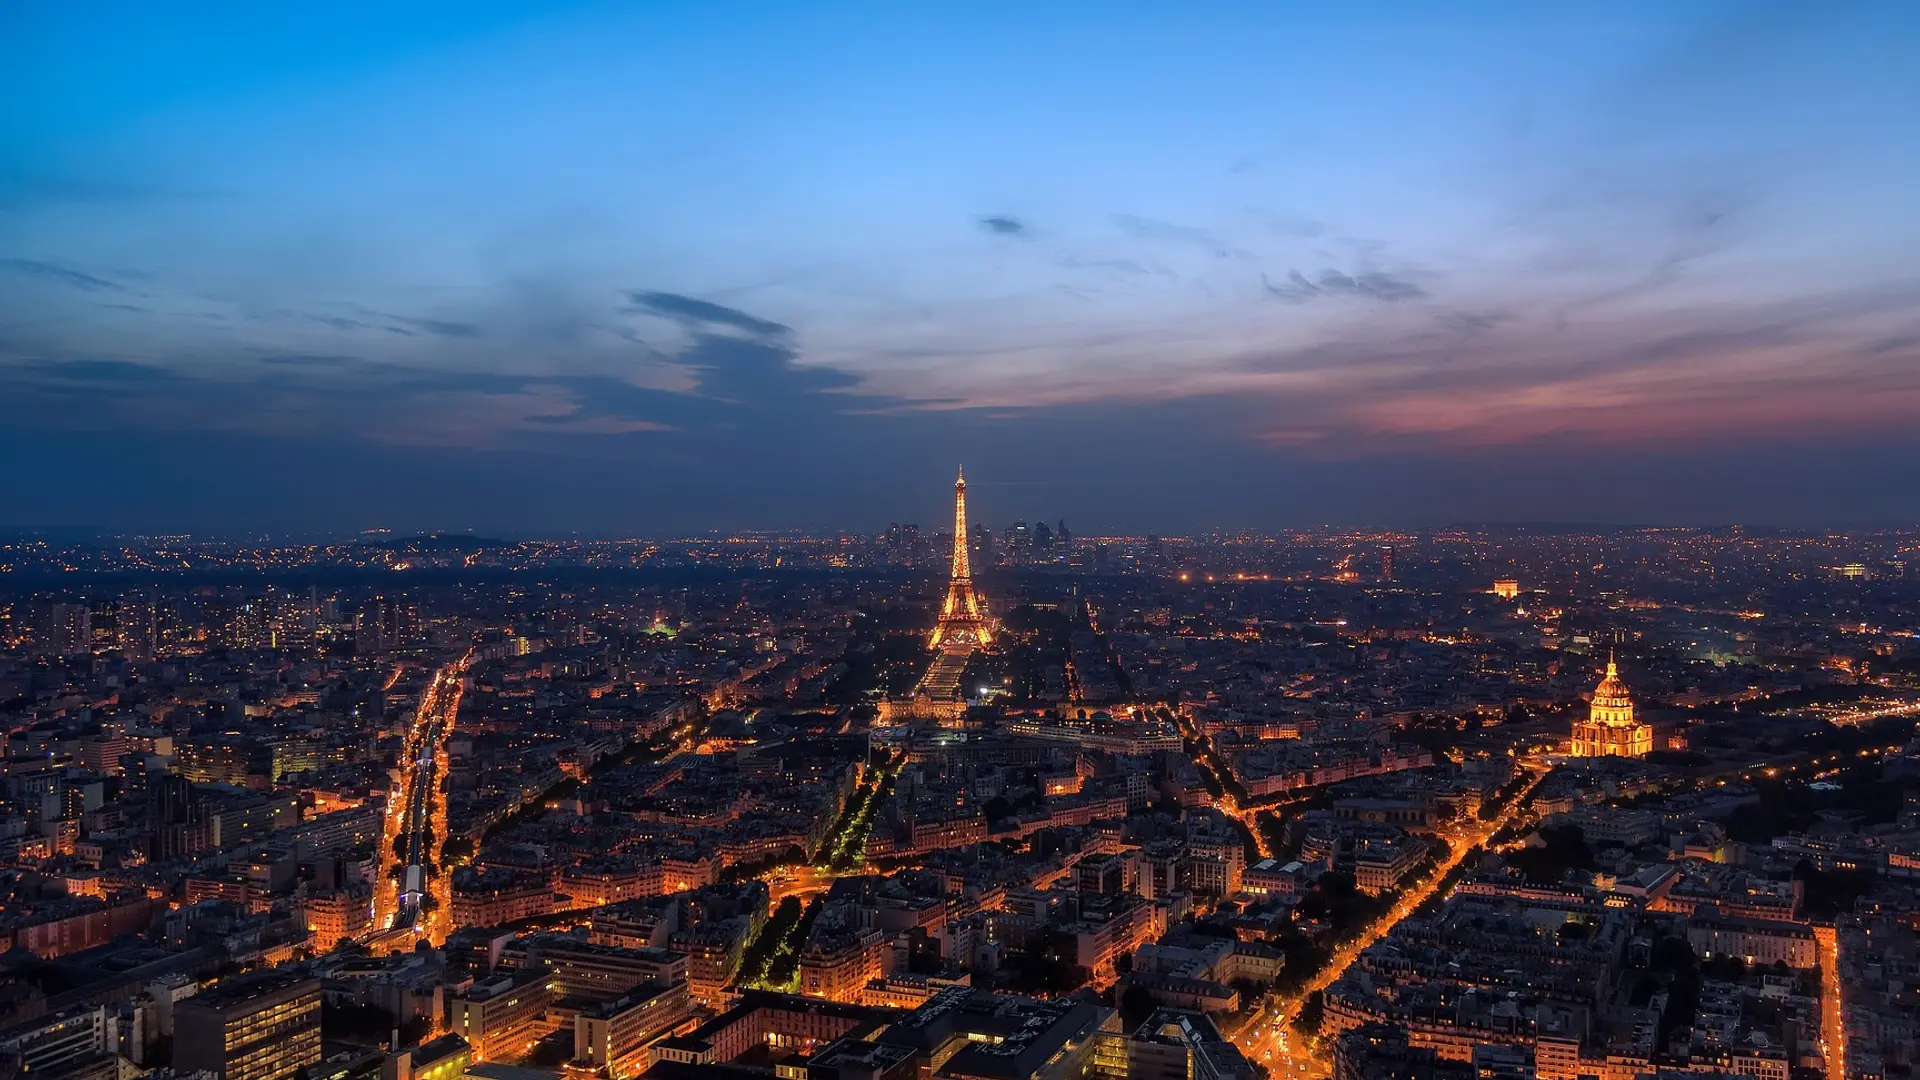 Destinations Toplists - 30 Best Things to See & Do in Paris